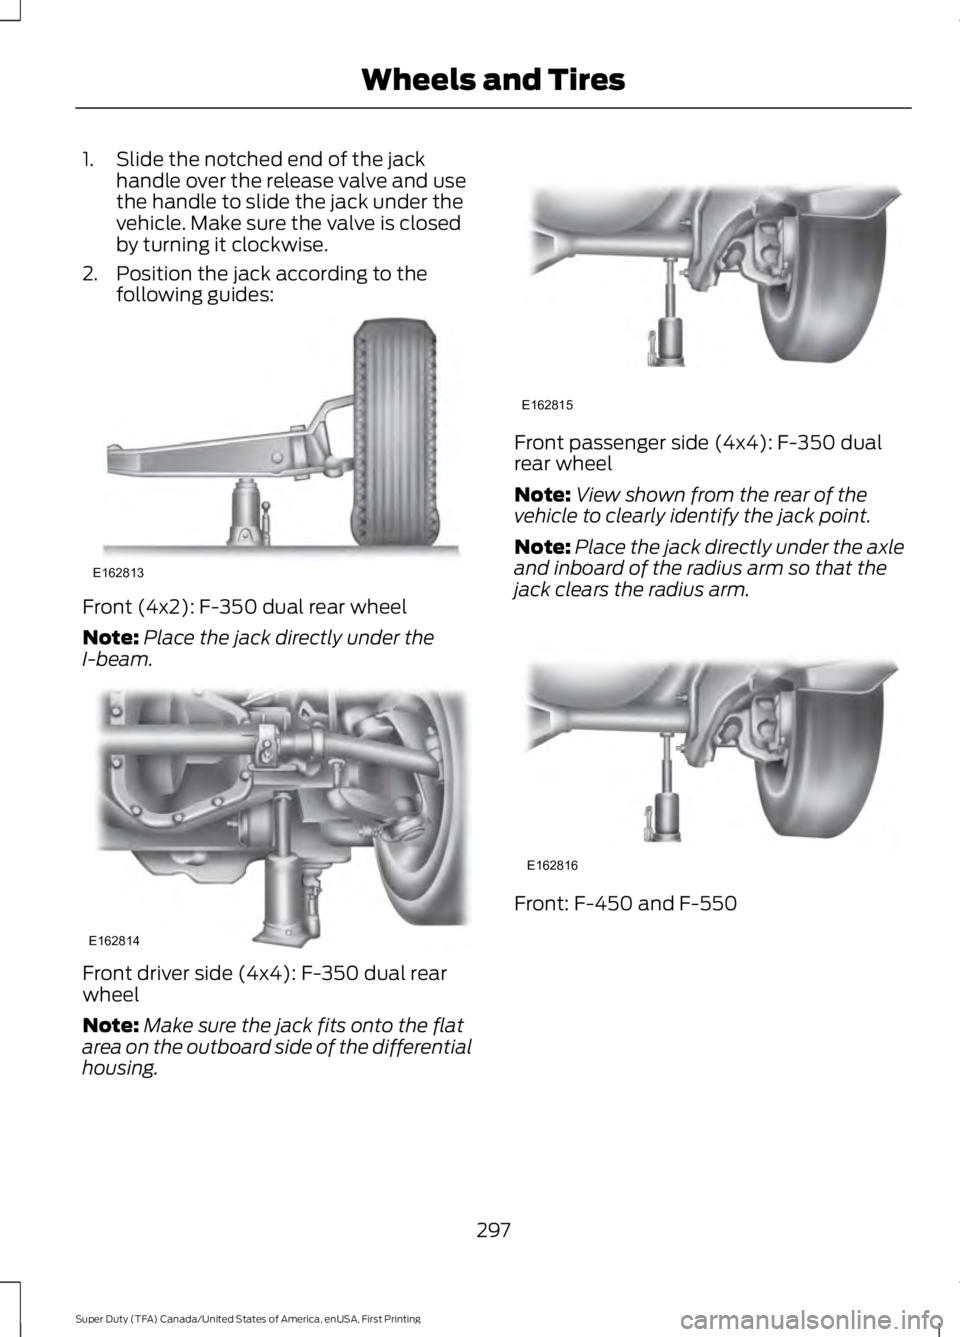 FORD F450 SUPER DUTY 2016  Owners Manual 1. Slide the notched end of the jackhandle over the release valve and usethe handle to slide the jack under thevehicle. Make sure the valve is closedby turning it clockwise.
2. Position the jack accor